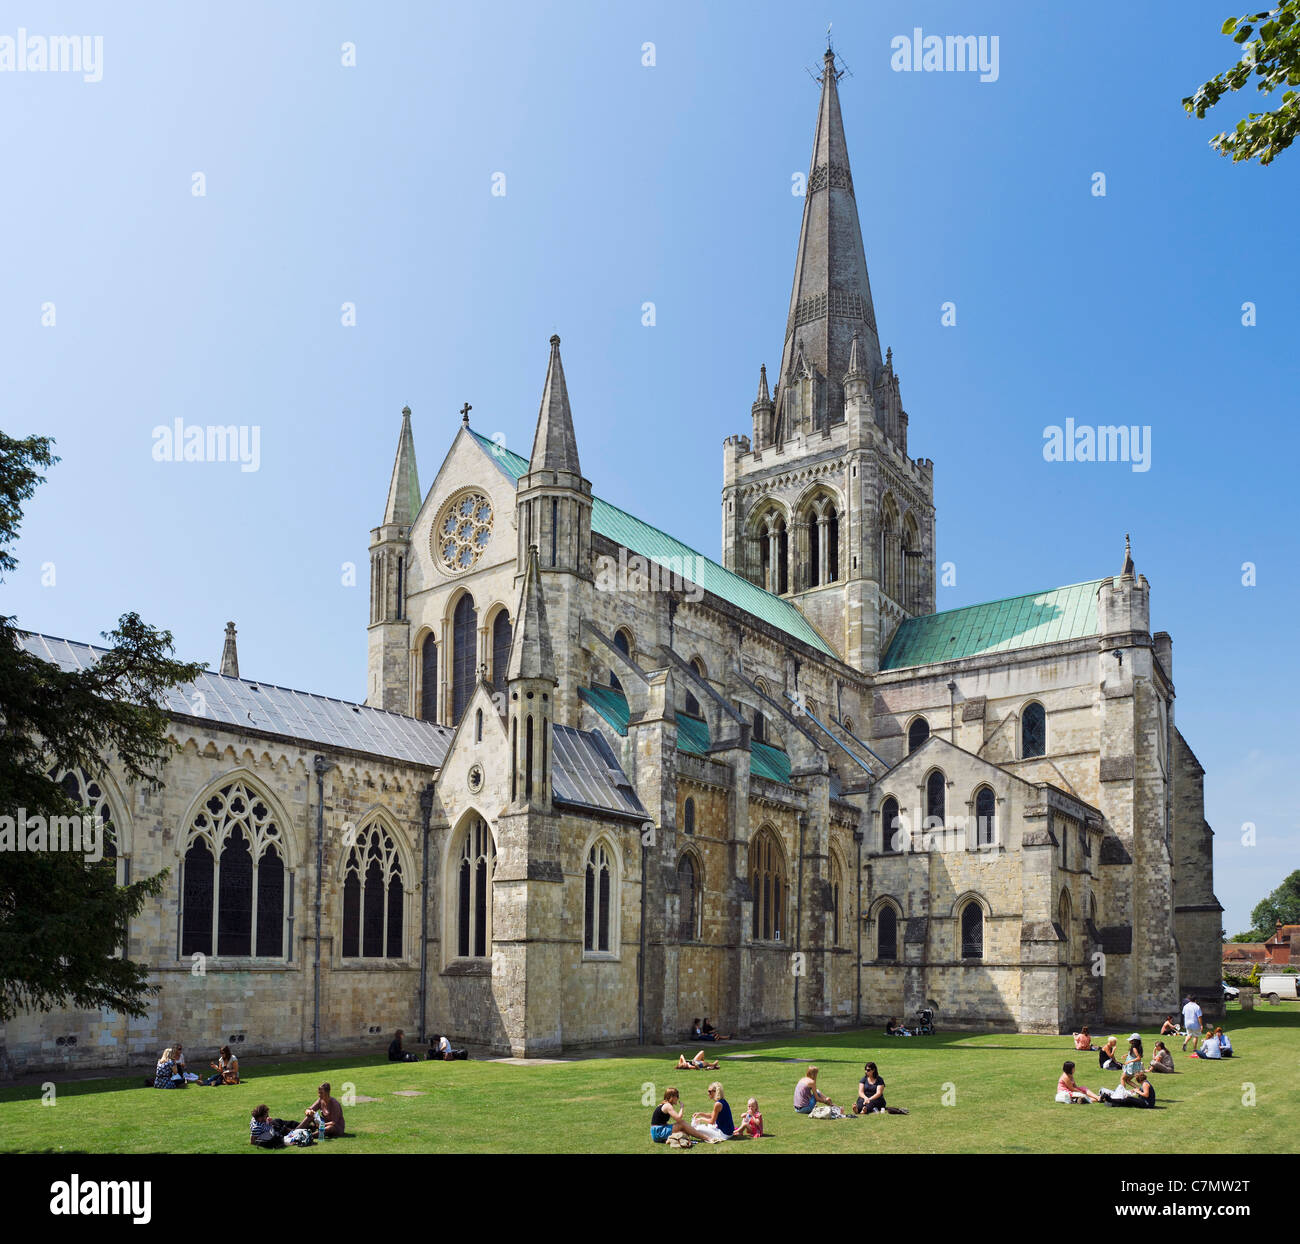 Chichester Cathedral, Chichester, West Sussex, in Inghilterra, Regno Unito Foto Stock